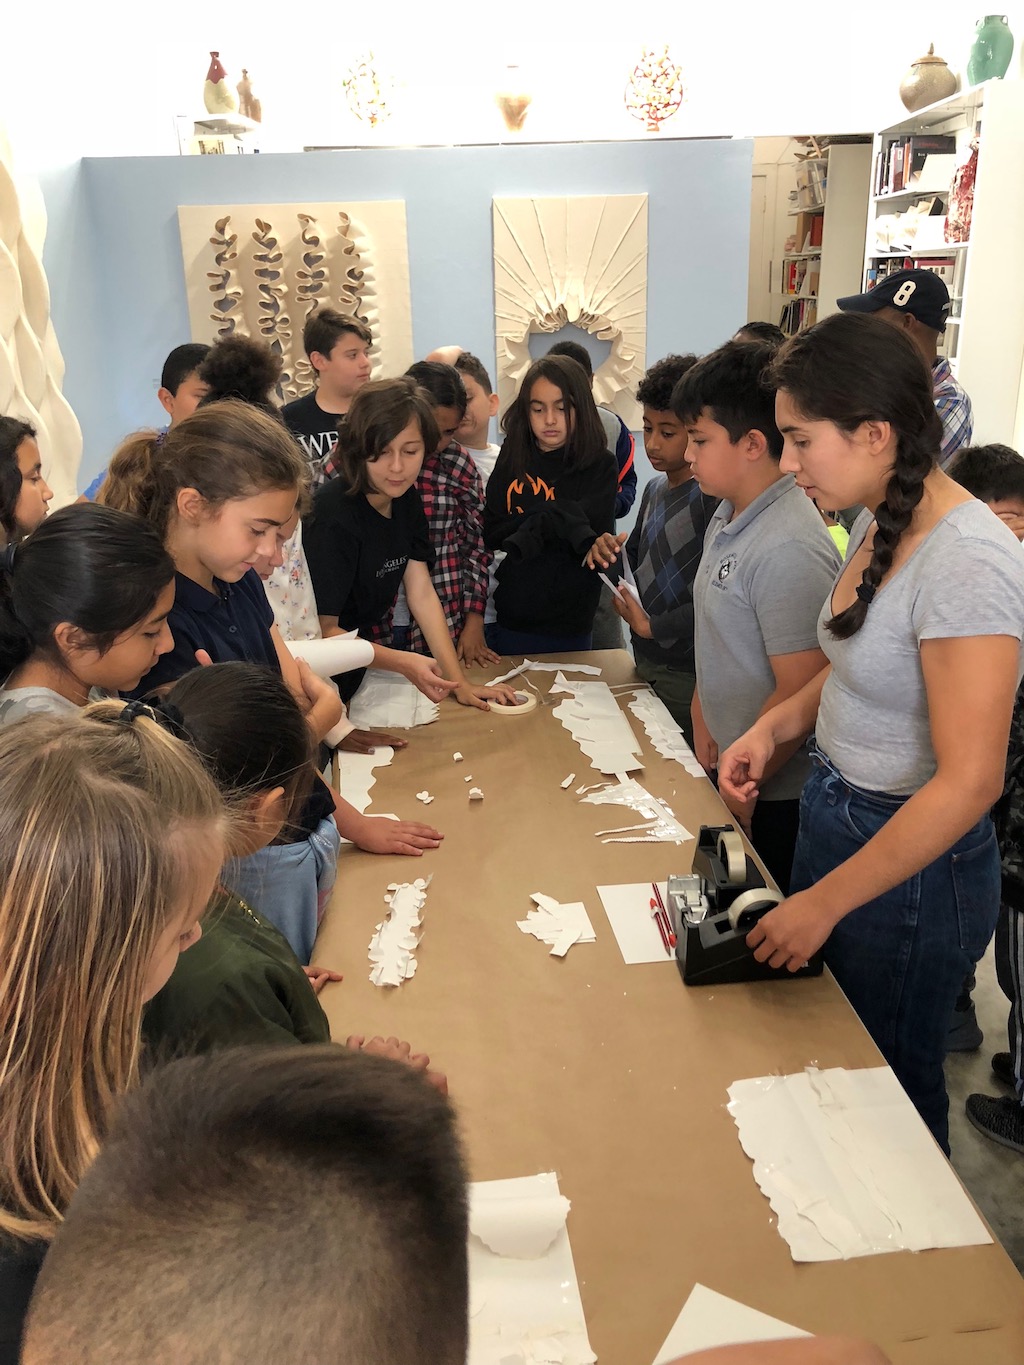 Education Outreach, Rosewood Elementary Visits "Mary Little: The Shape of Cloth"